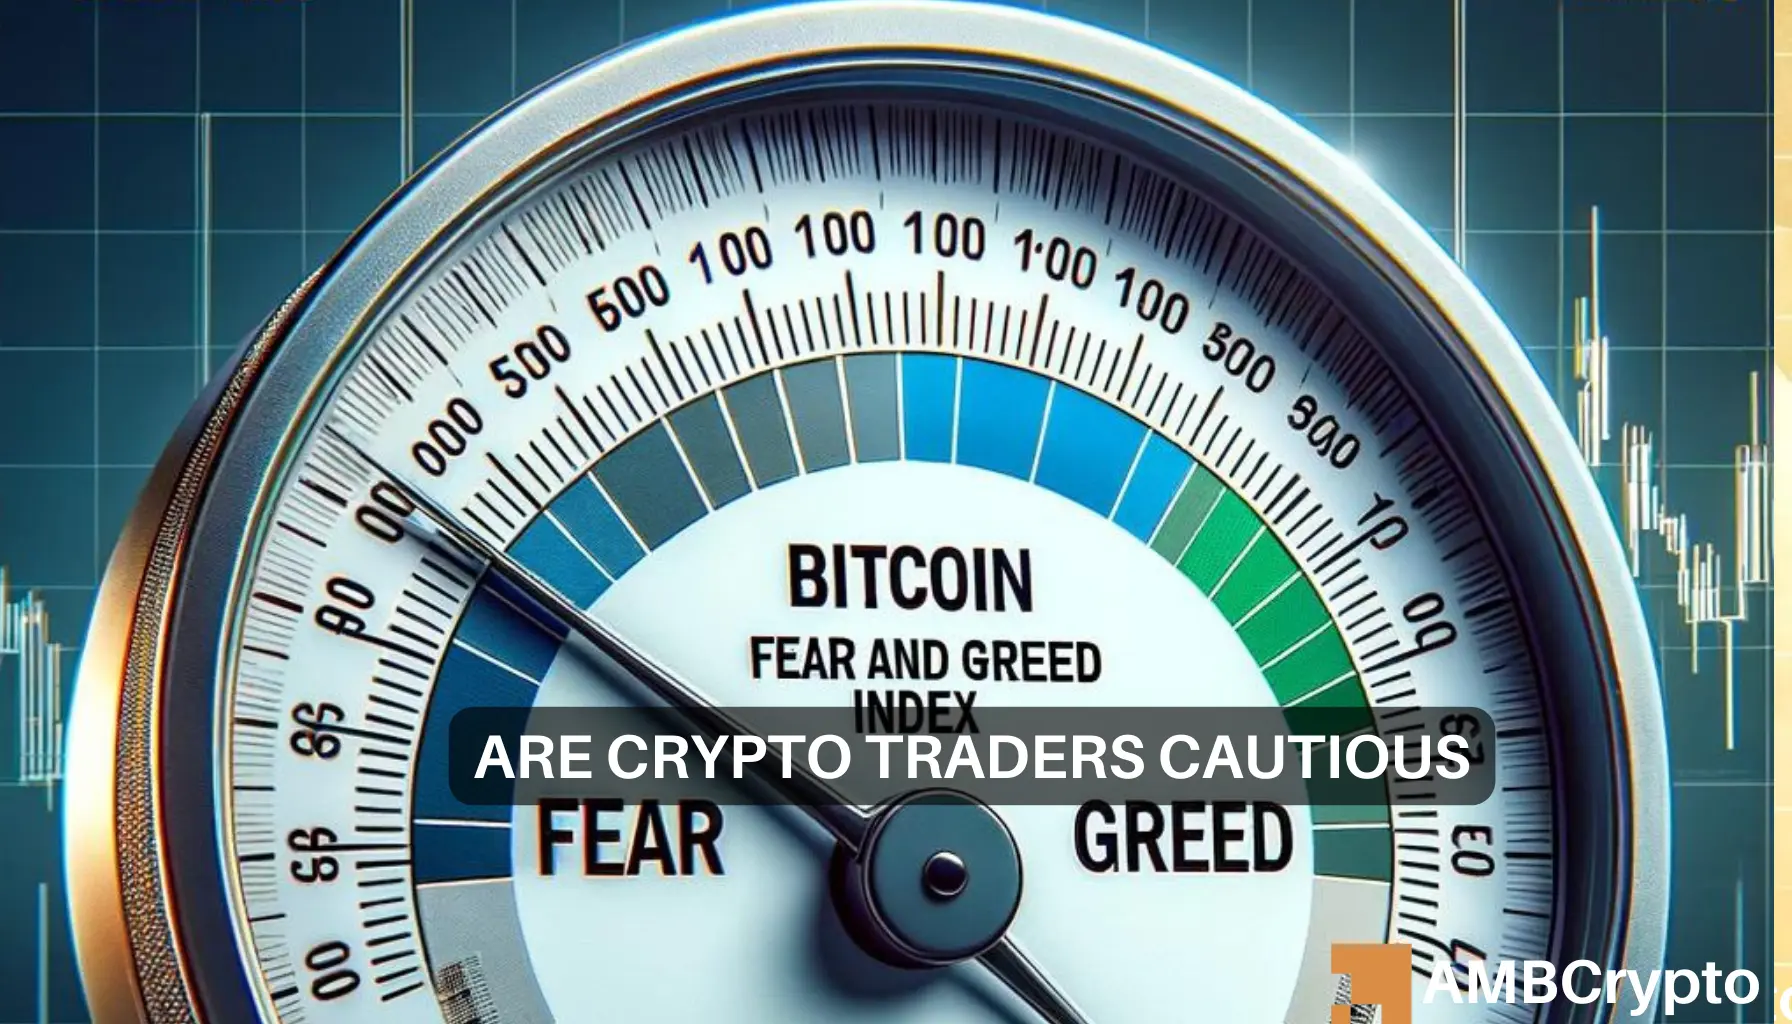 Crypto Fear and Greed Index signals greed: Bitcoin, altcoins to rally?